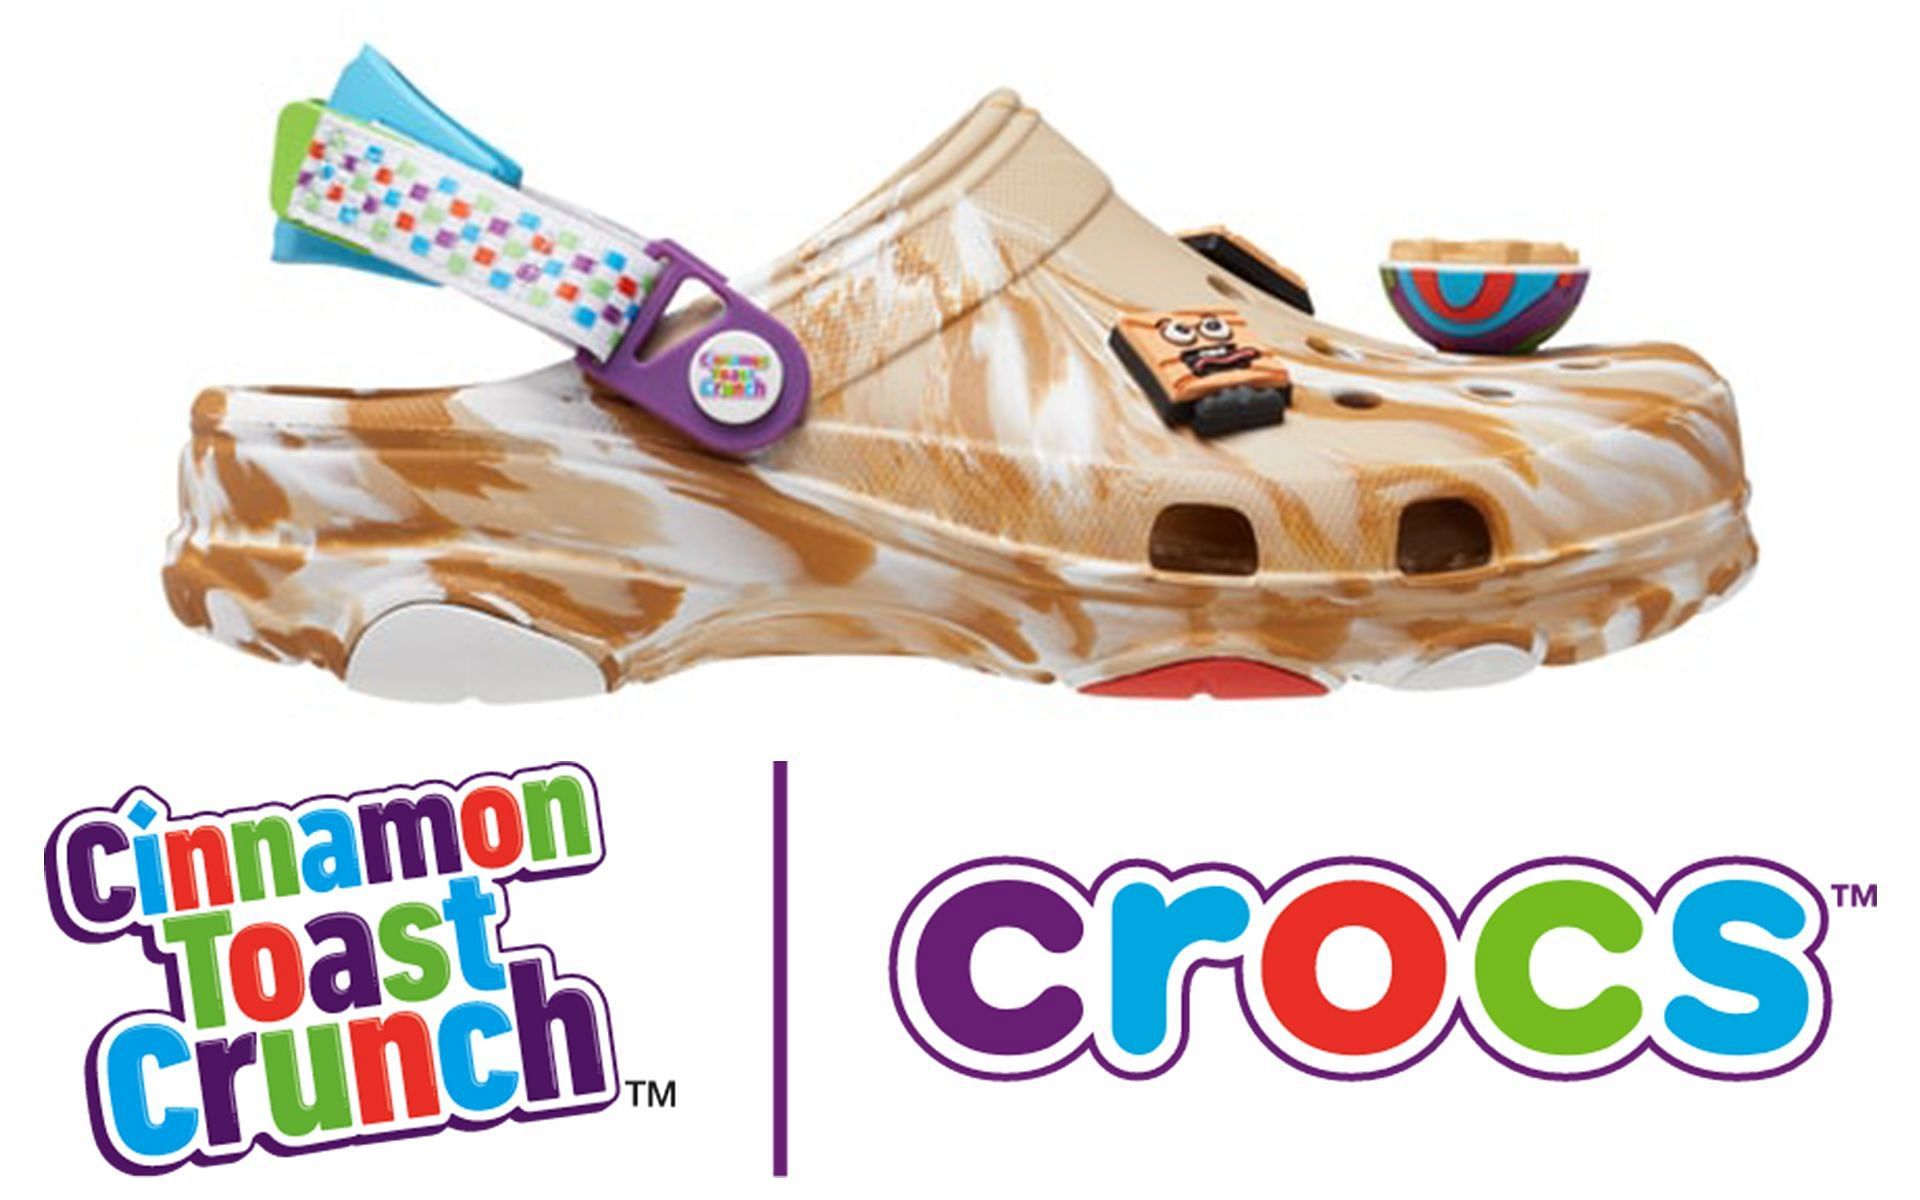 Crocs X General Mills collab: Where to buy, release date, price